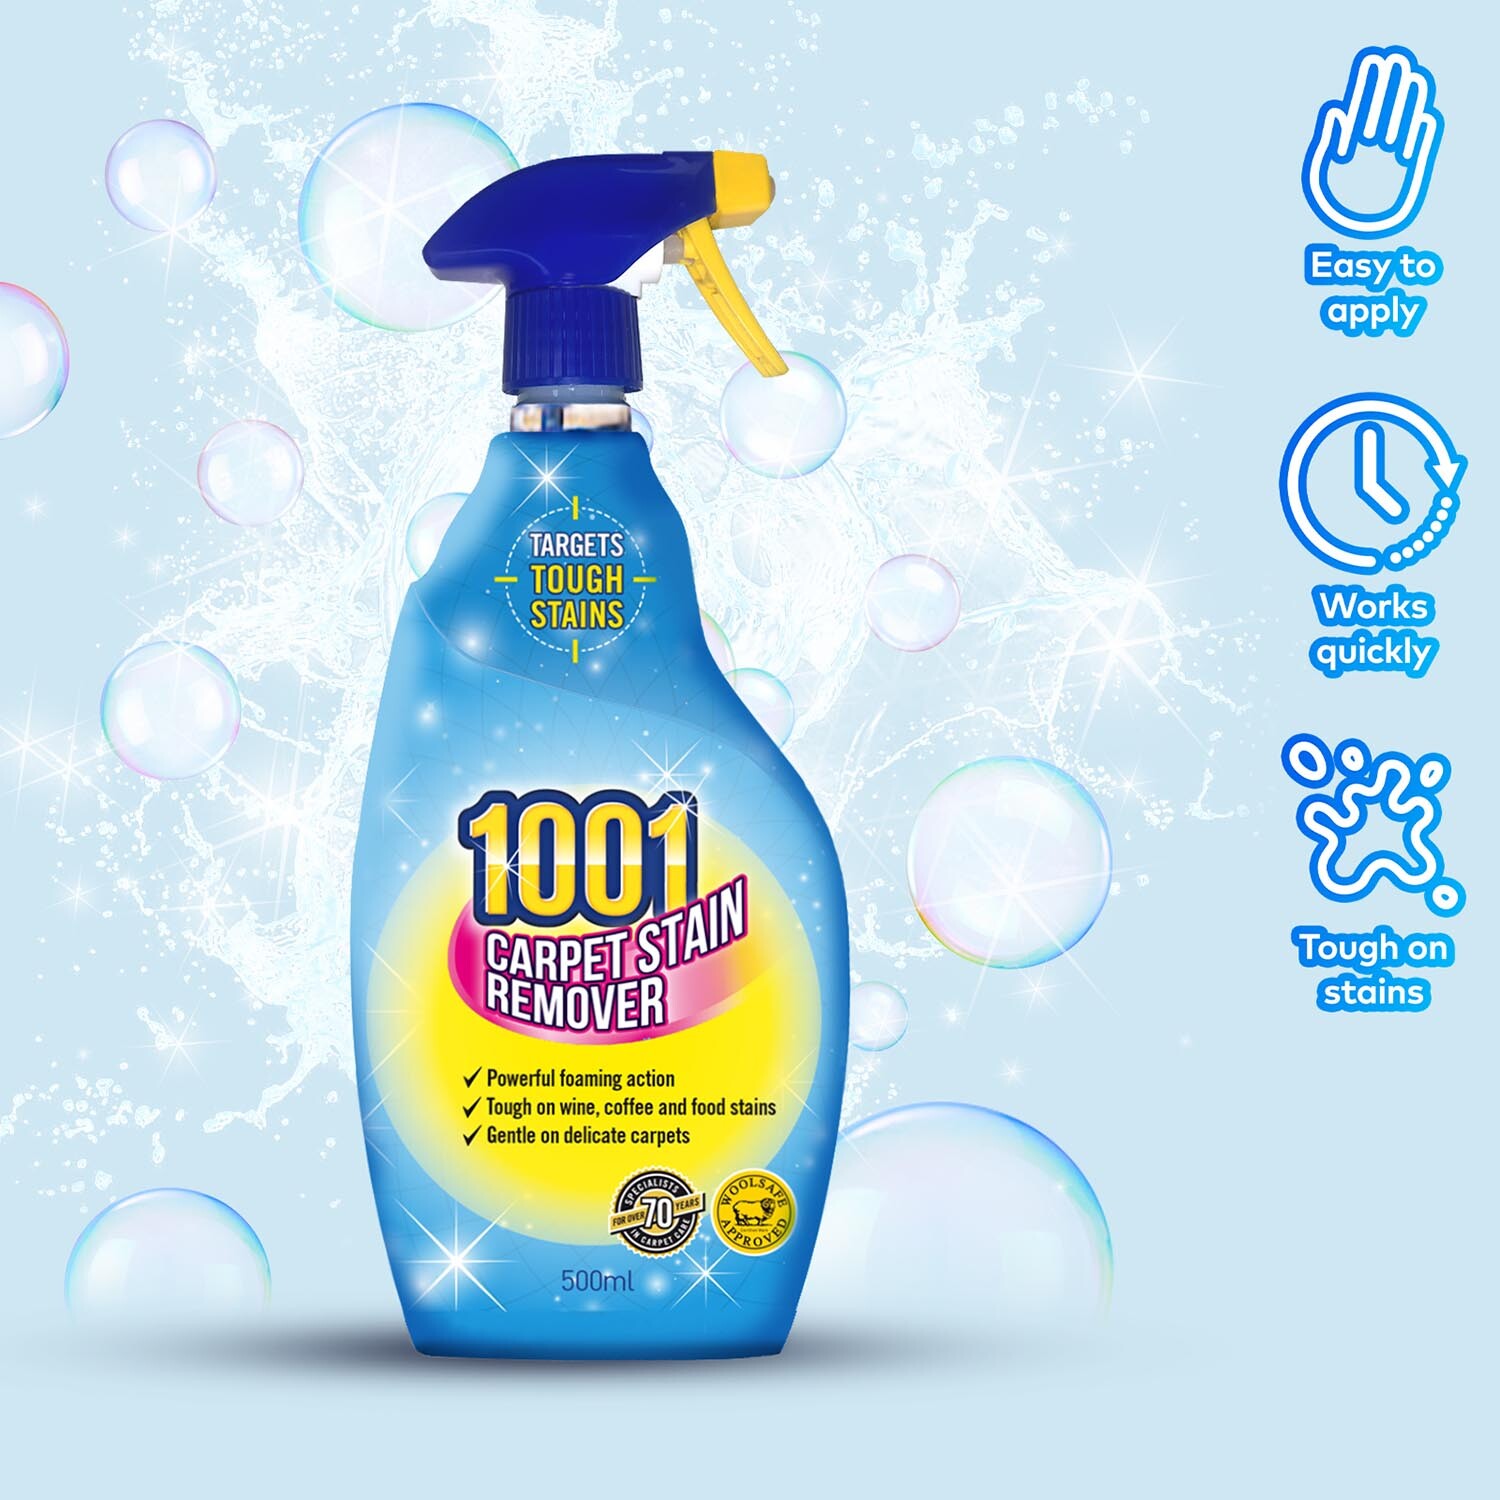 1001 Carpet Stain Remover 500ml 2x3 Image